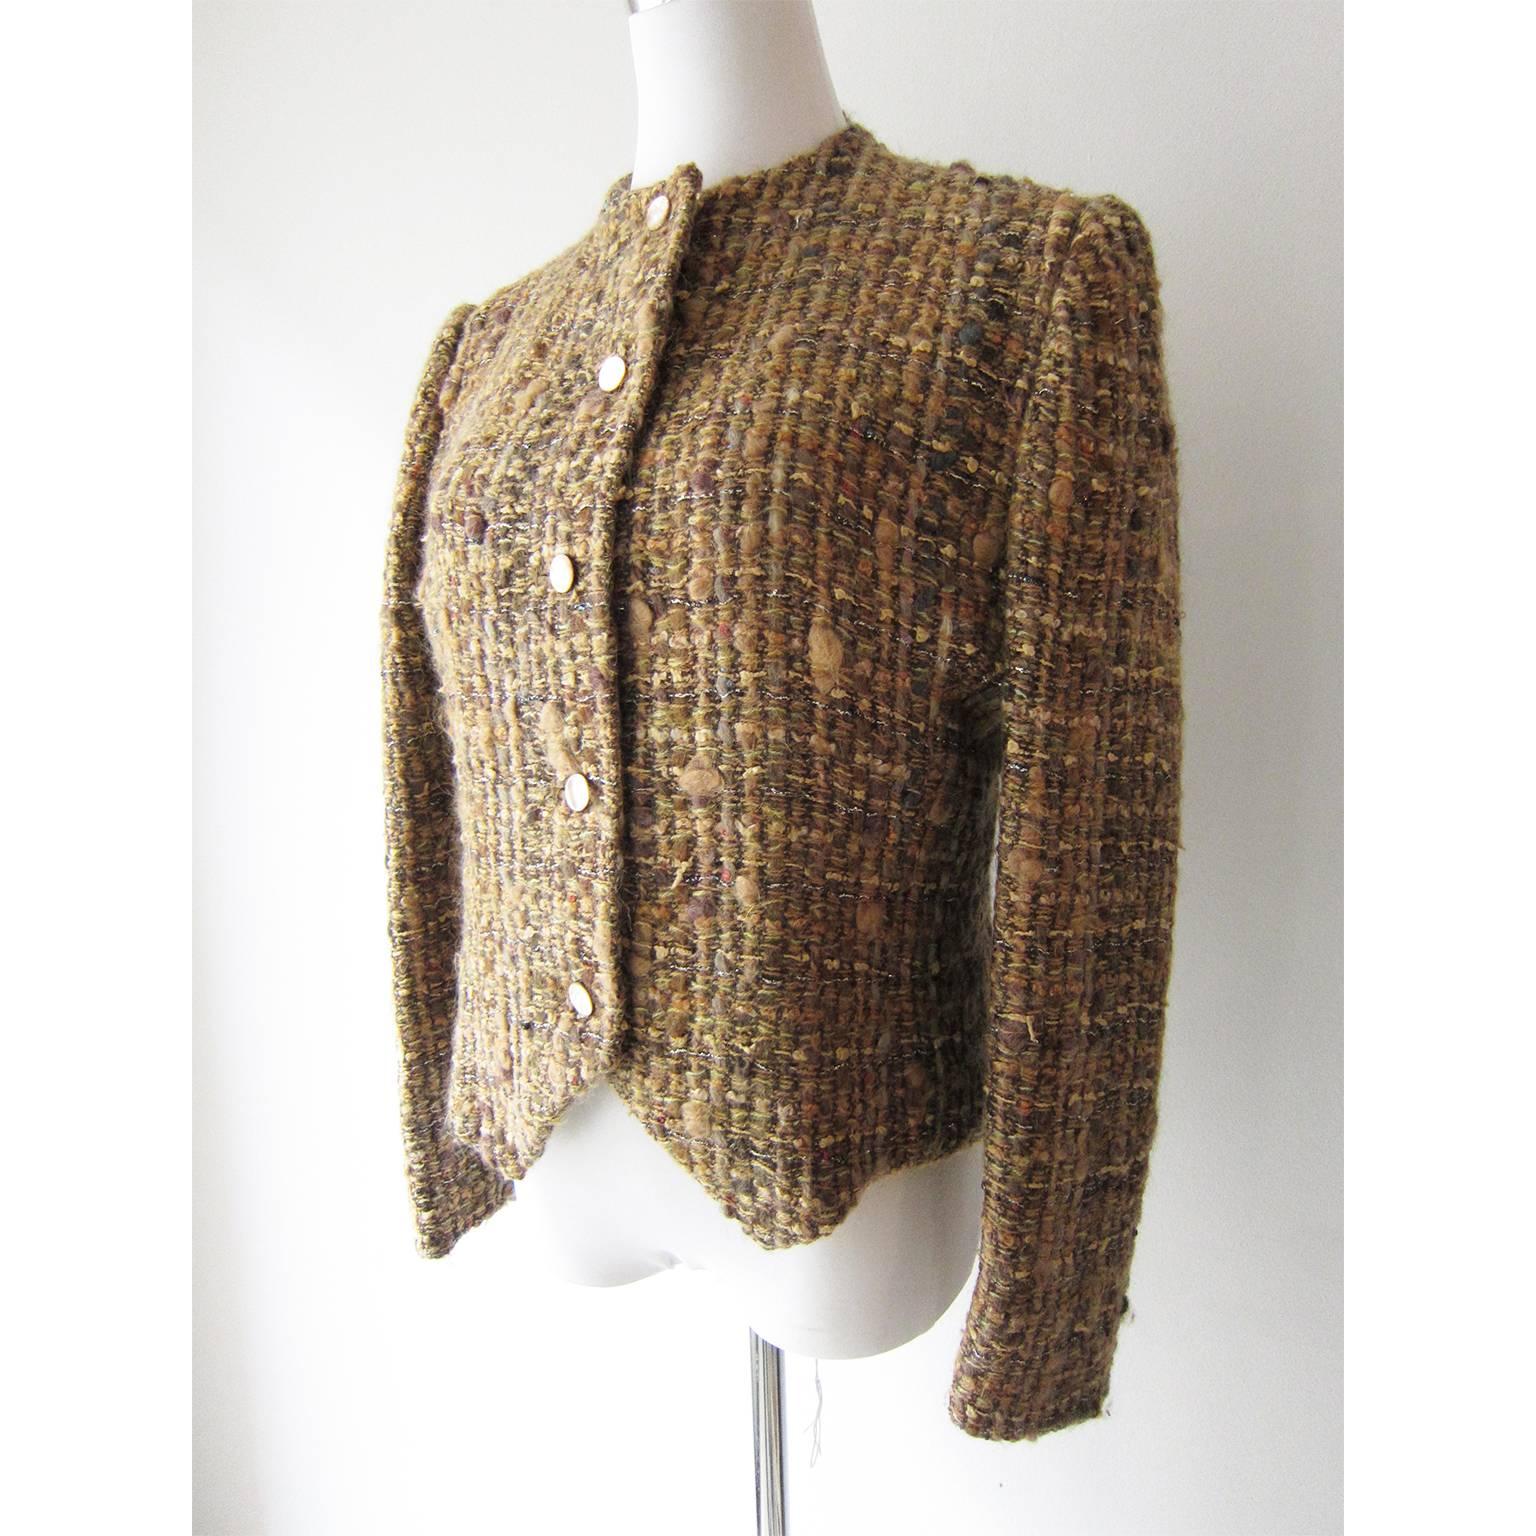 Chloe by Karl Lagerfeld beige and gold tone tweed jacket from circa 1980s.
The buttons are made of mother-of-pearl.
There is no size specification - please note the dimensions.
It fit like Medium.

Measurements :
Underarm : 95 cm
Back Length : about